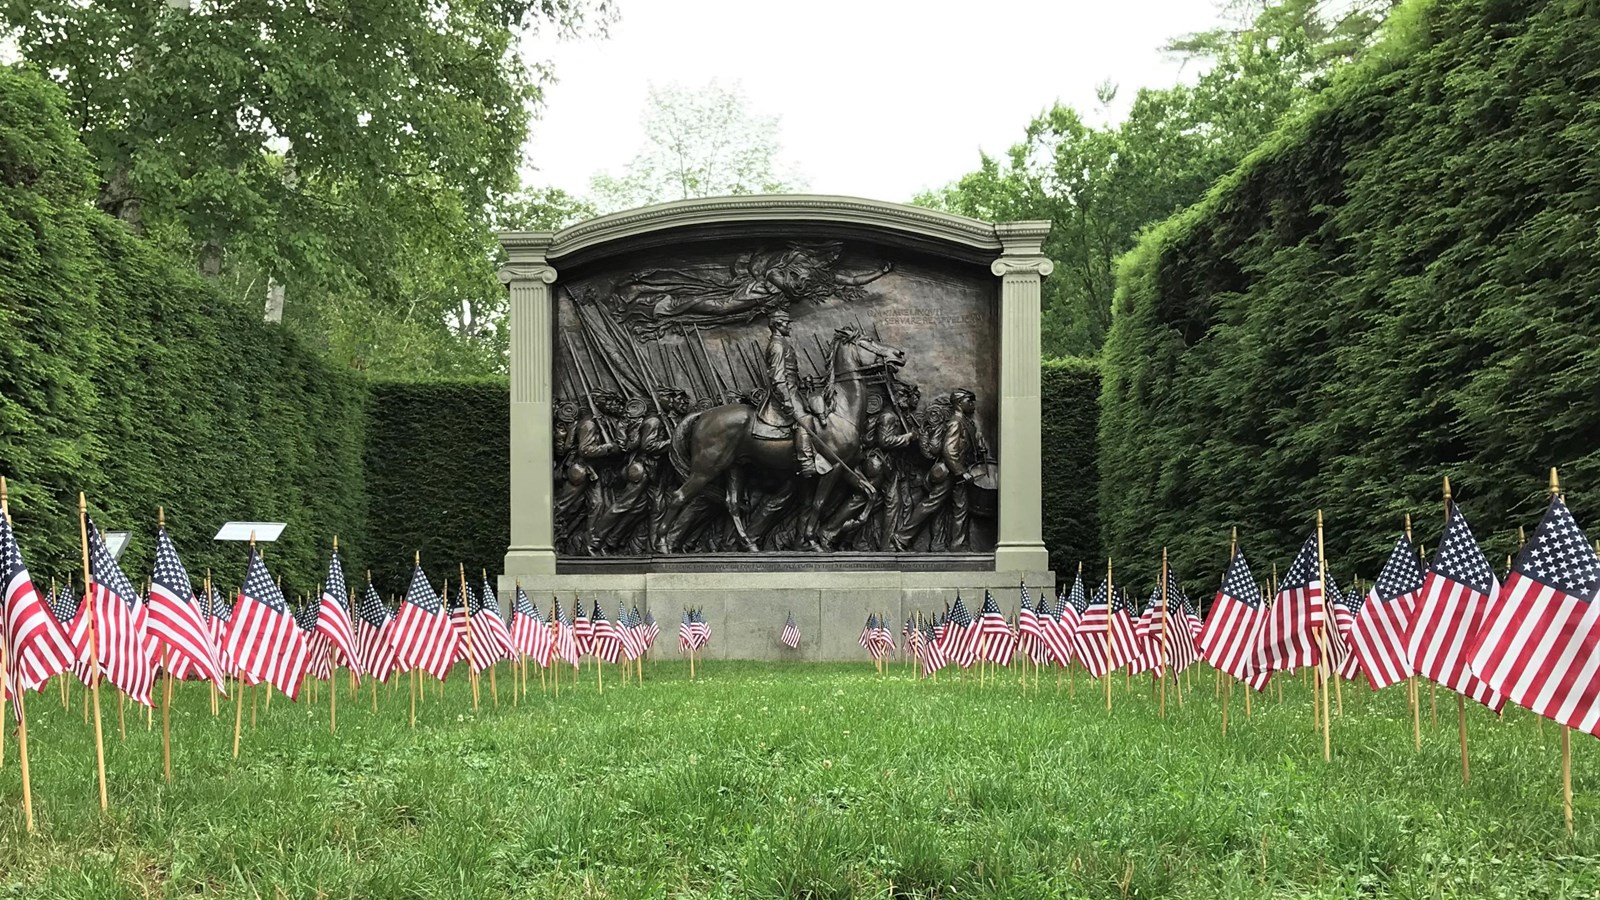 The Shaw Memorial with American flags